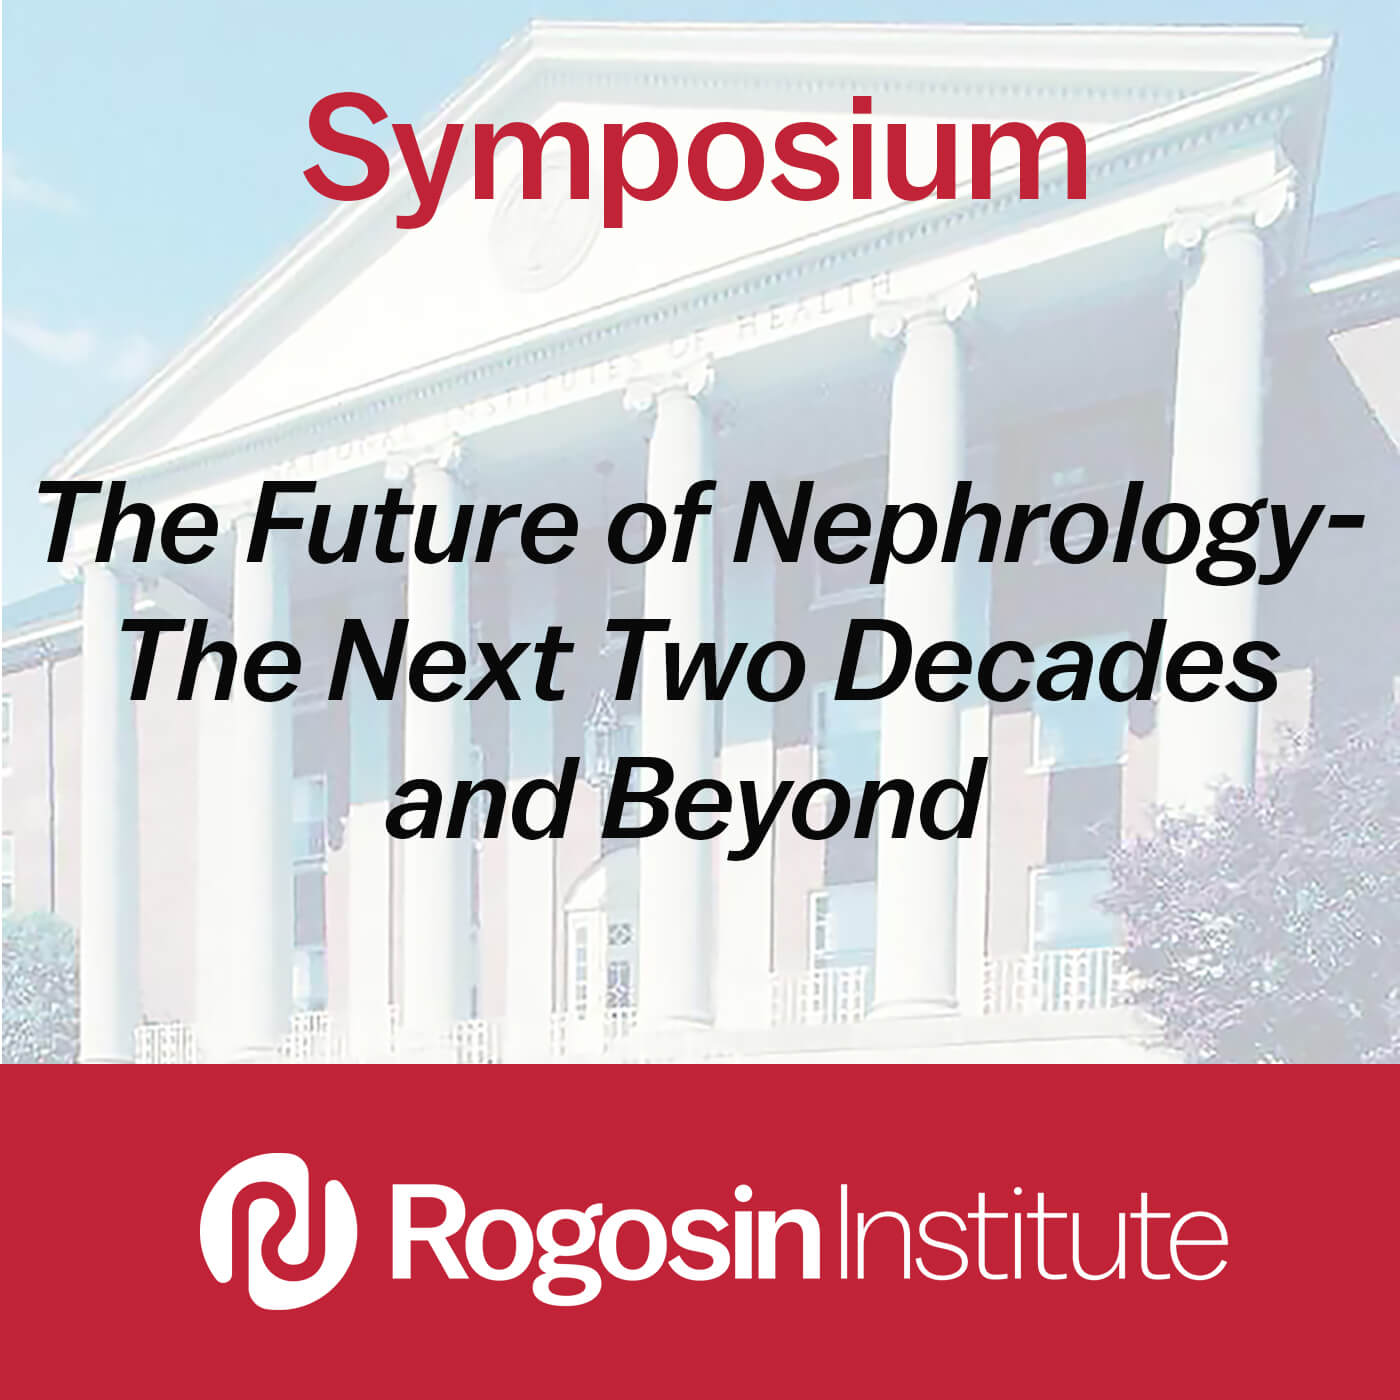 The Role of Nursing in Nephrology’s Future